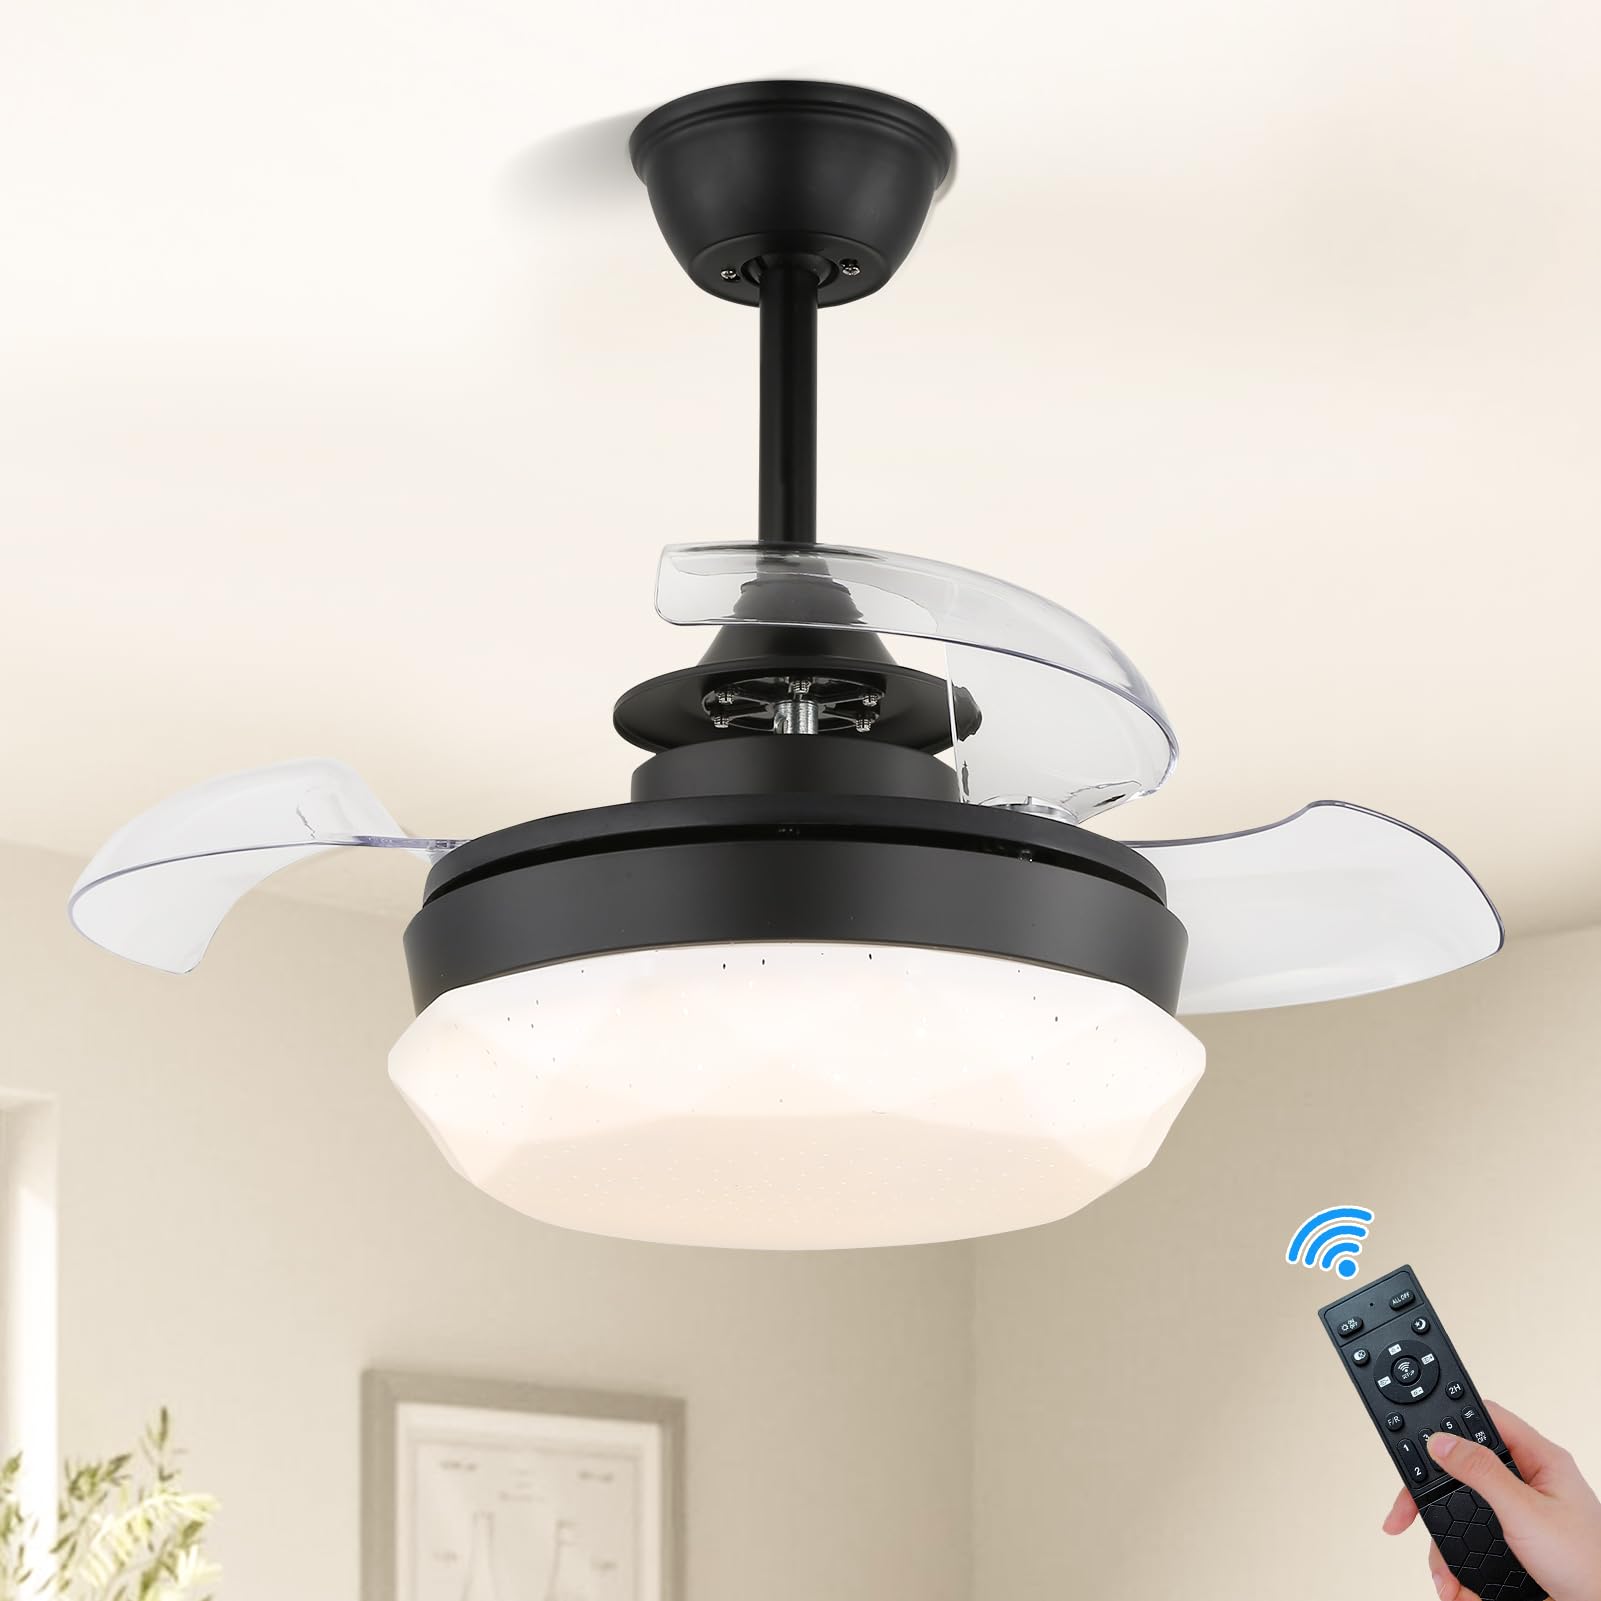 Small Ceiling Fans with Lights 22'' Chandelier Ceiling Fans Dimmable, Semi Flush Mount Ceiling Fans Low Decibel 6 Speeds, LED Fandelier Retractable Blades for Small Spaces, Kid Rooms (Black)